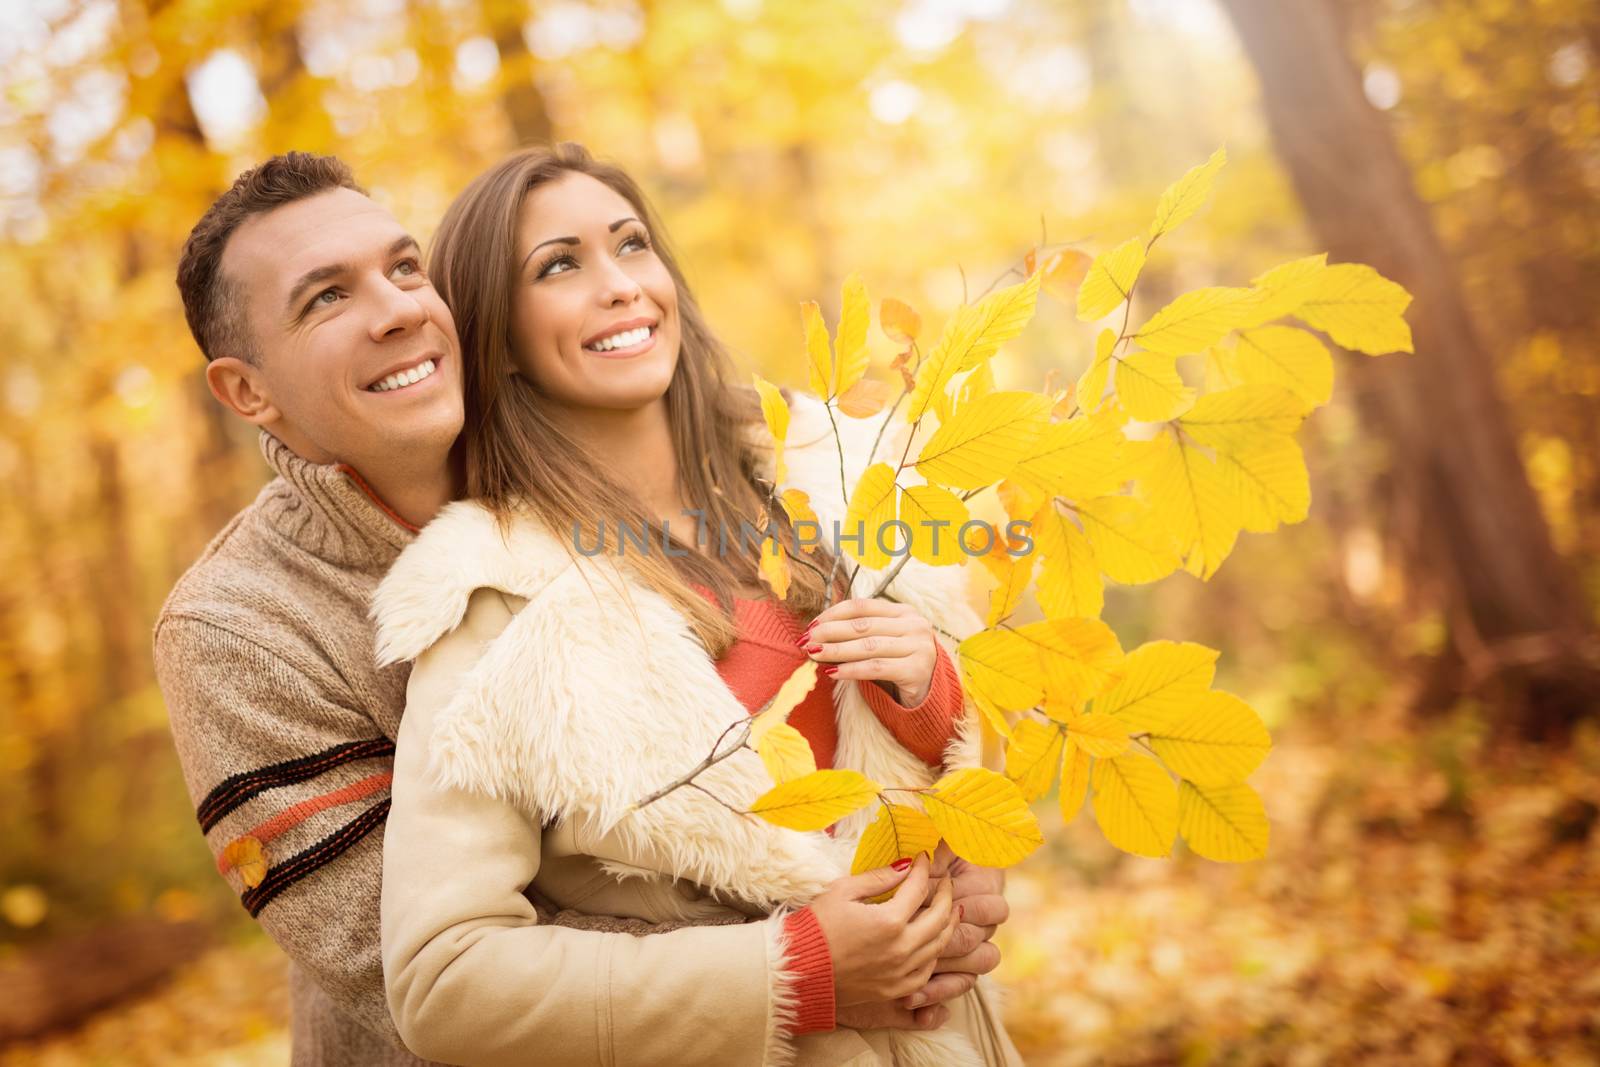 Portrait of a beautiful young couple in sunny forest in autumn colors. They are at embraced and holding yellow leaf.